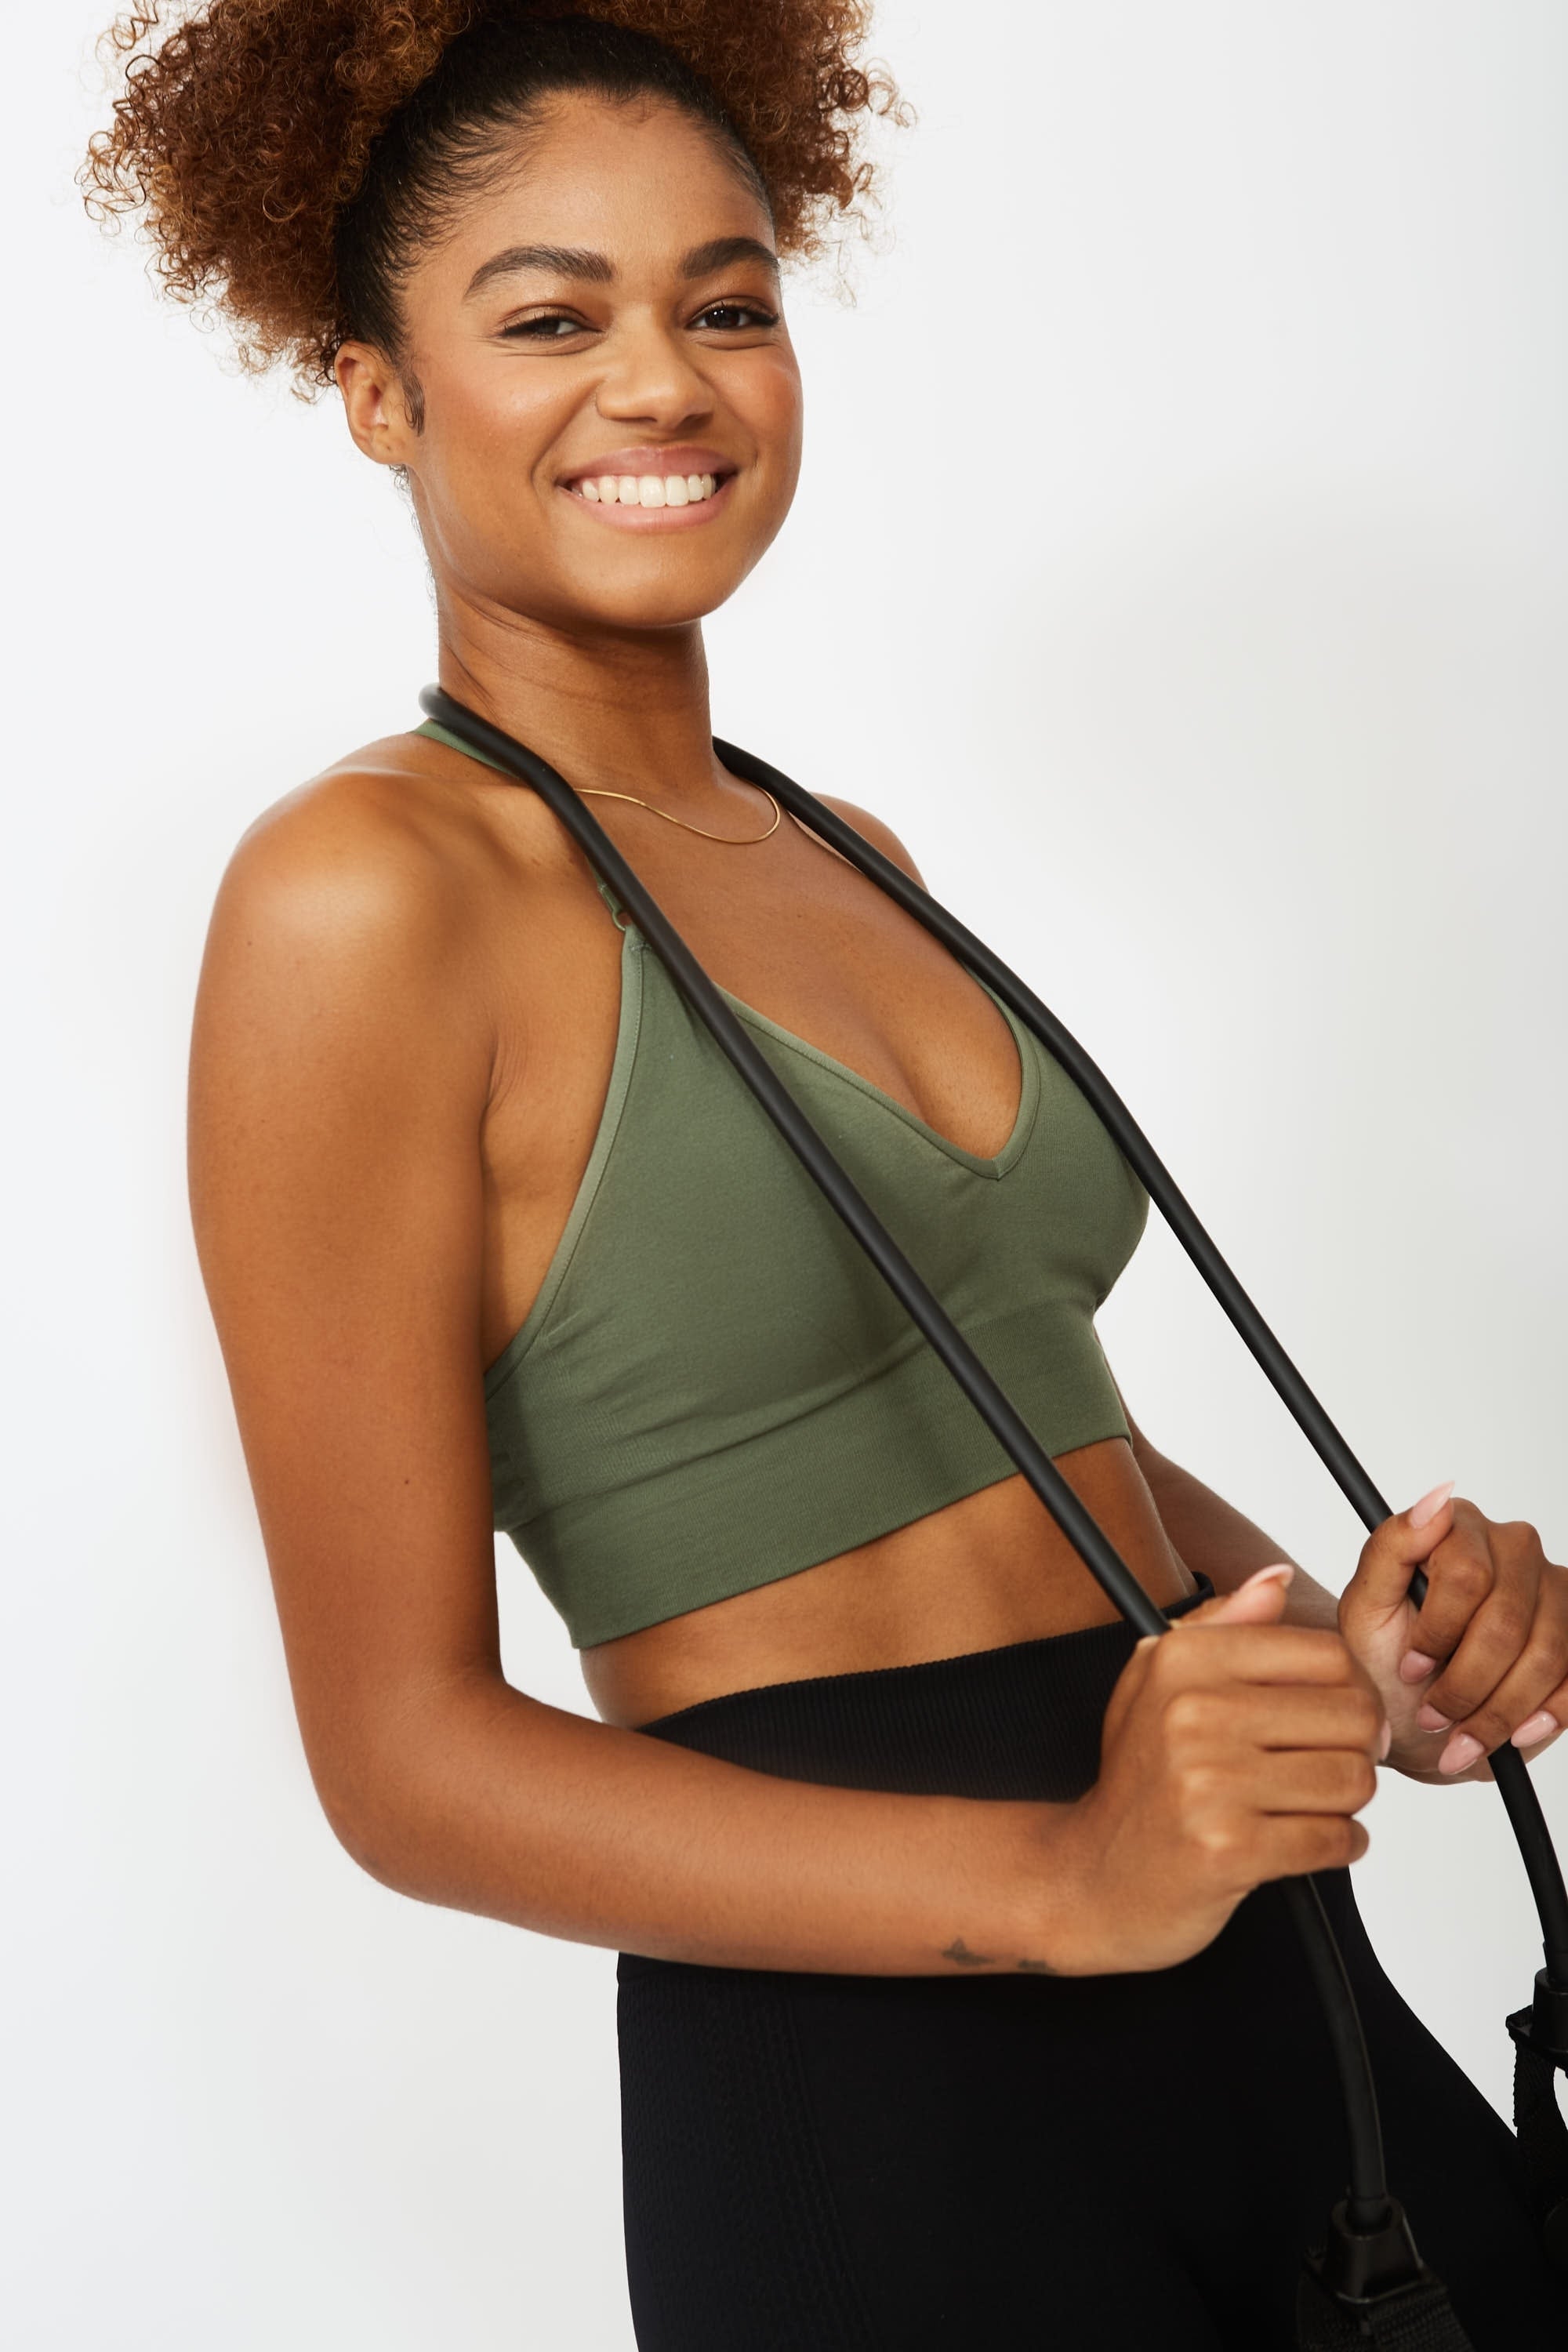 Model wearing green supportive sports bra and black leggings for sustainable women activewear, Jilla.